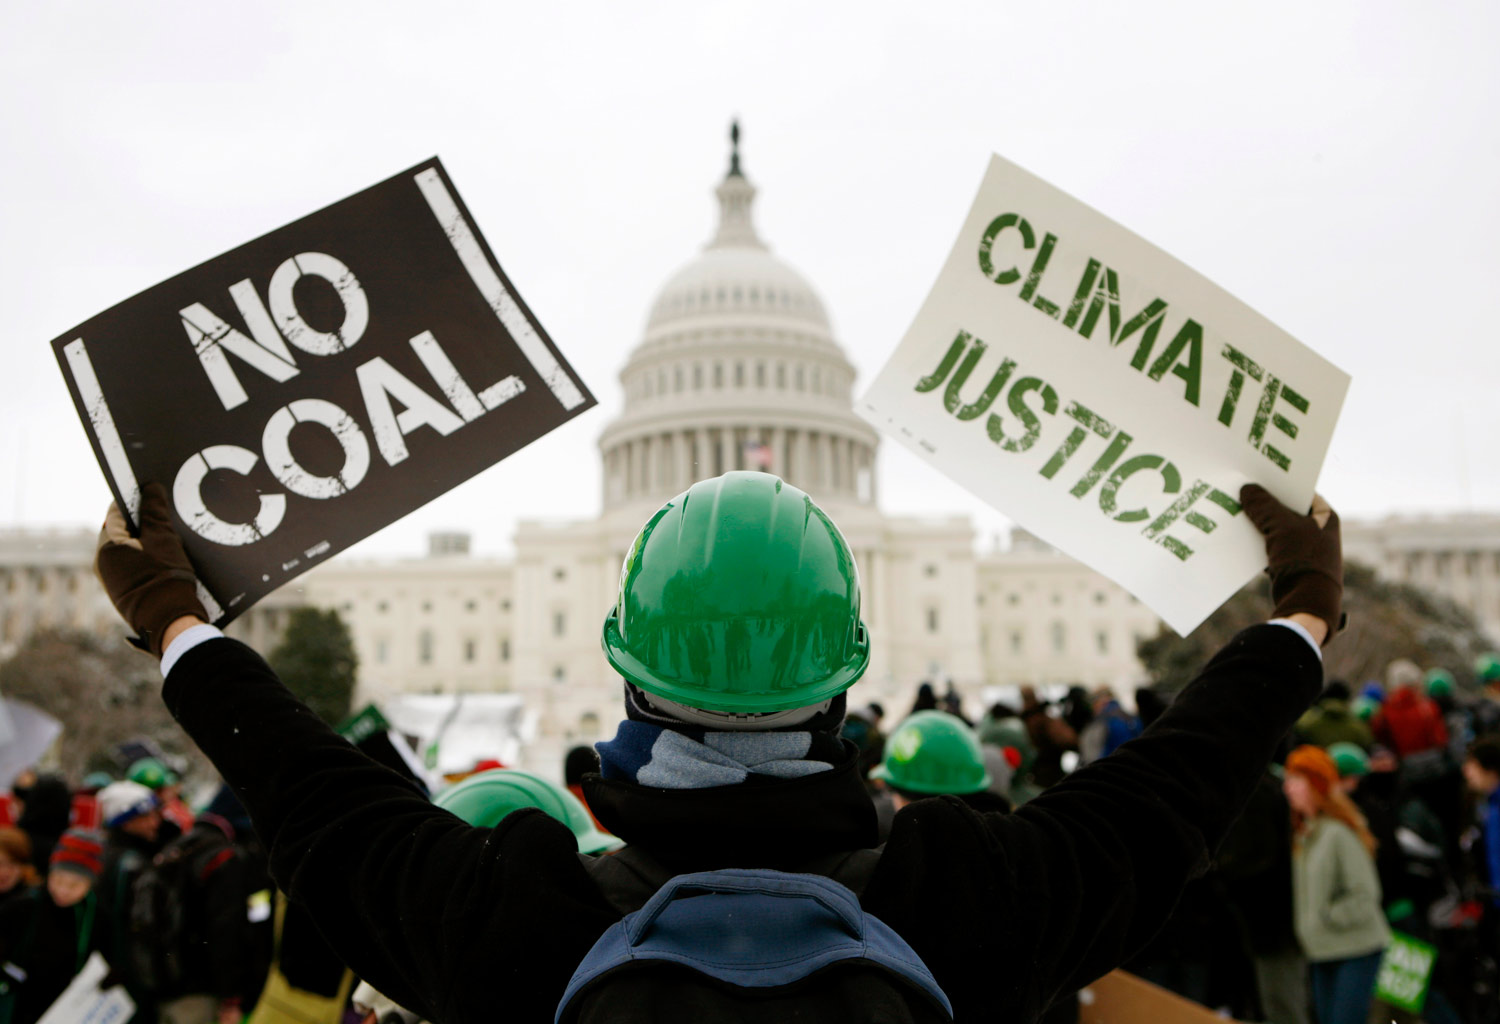 While We March for the Climate, Governments Meet With Polluters